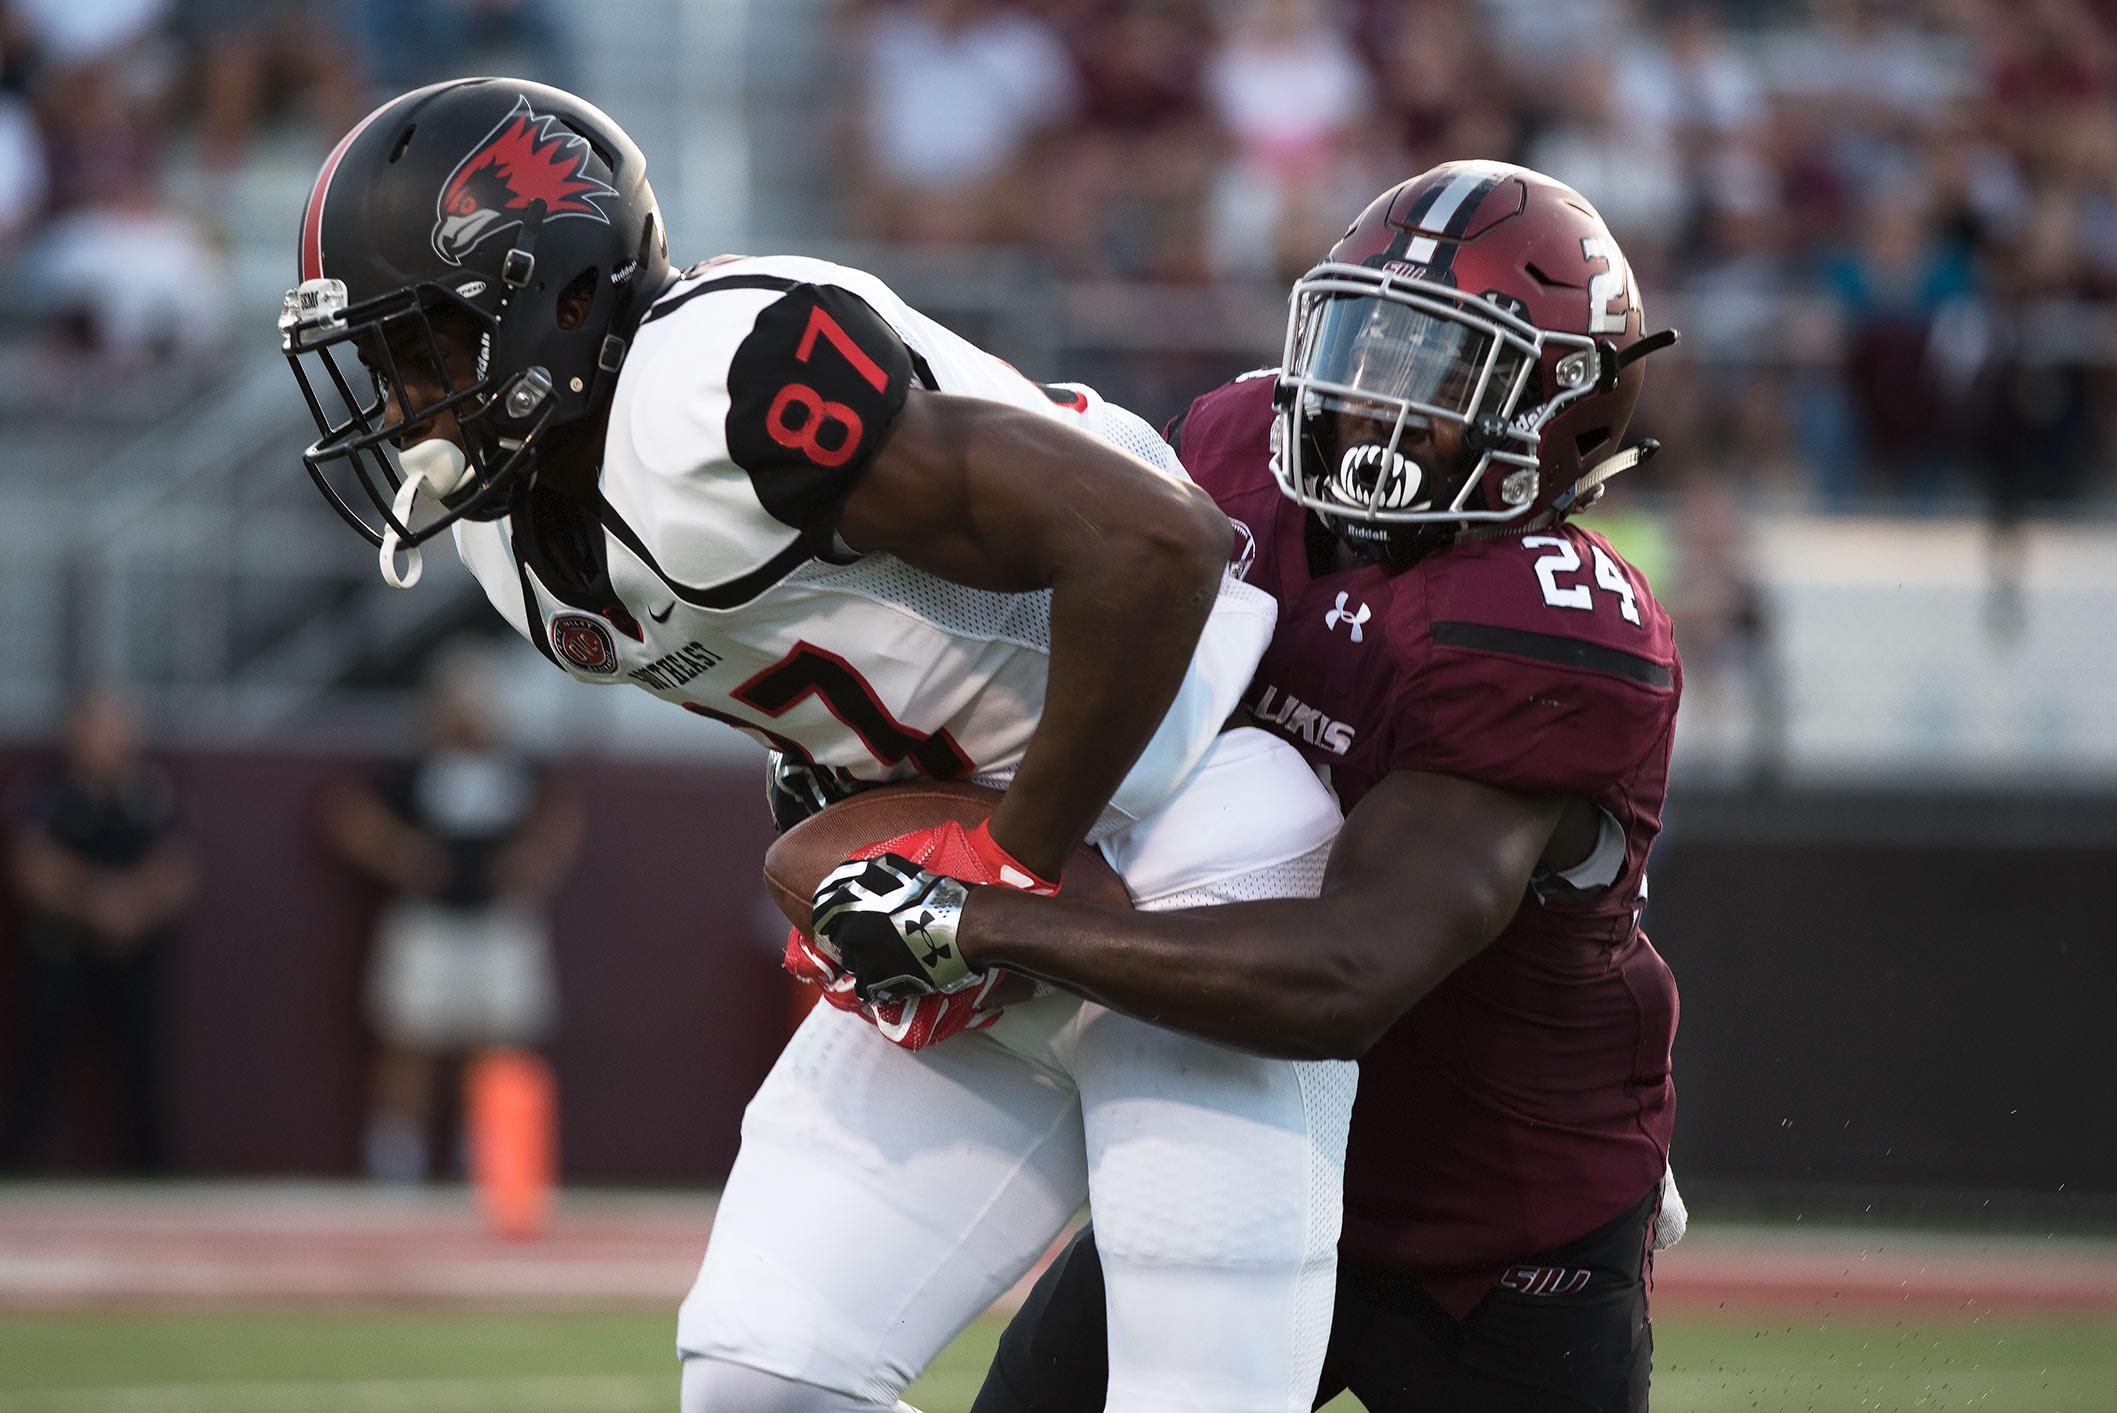 Saluki sophomore safety Jefferson Vea tackles SEMO redshirt freshman wide receiver Kristian Wilkerson during the first half of the Salukis' matchup against the Redhawks on Saturday, Sept. 10, 2016, at Saluki Stadium. (Jacob Wiegand | @JacobWiegand_DE)